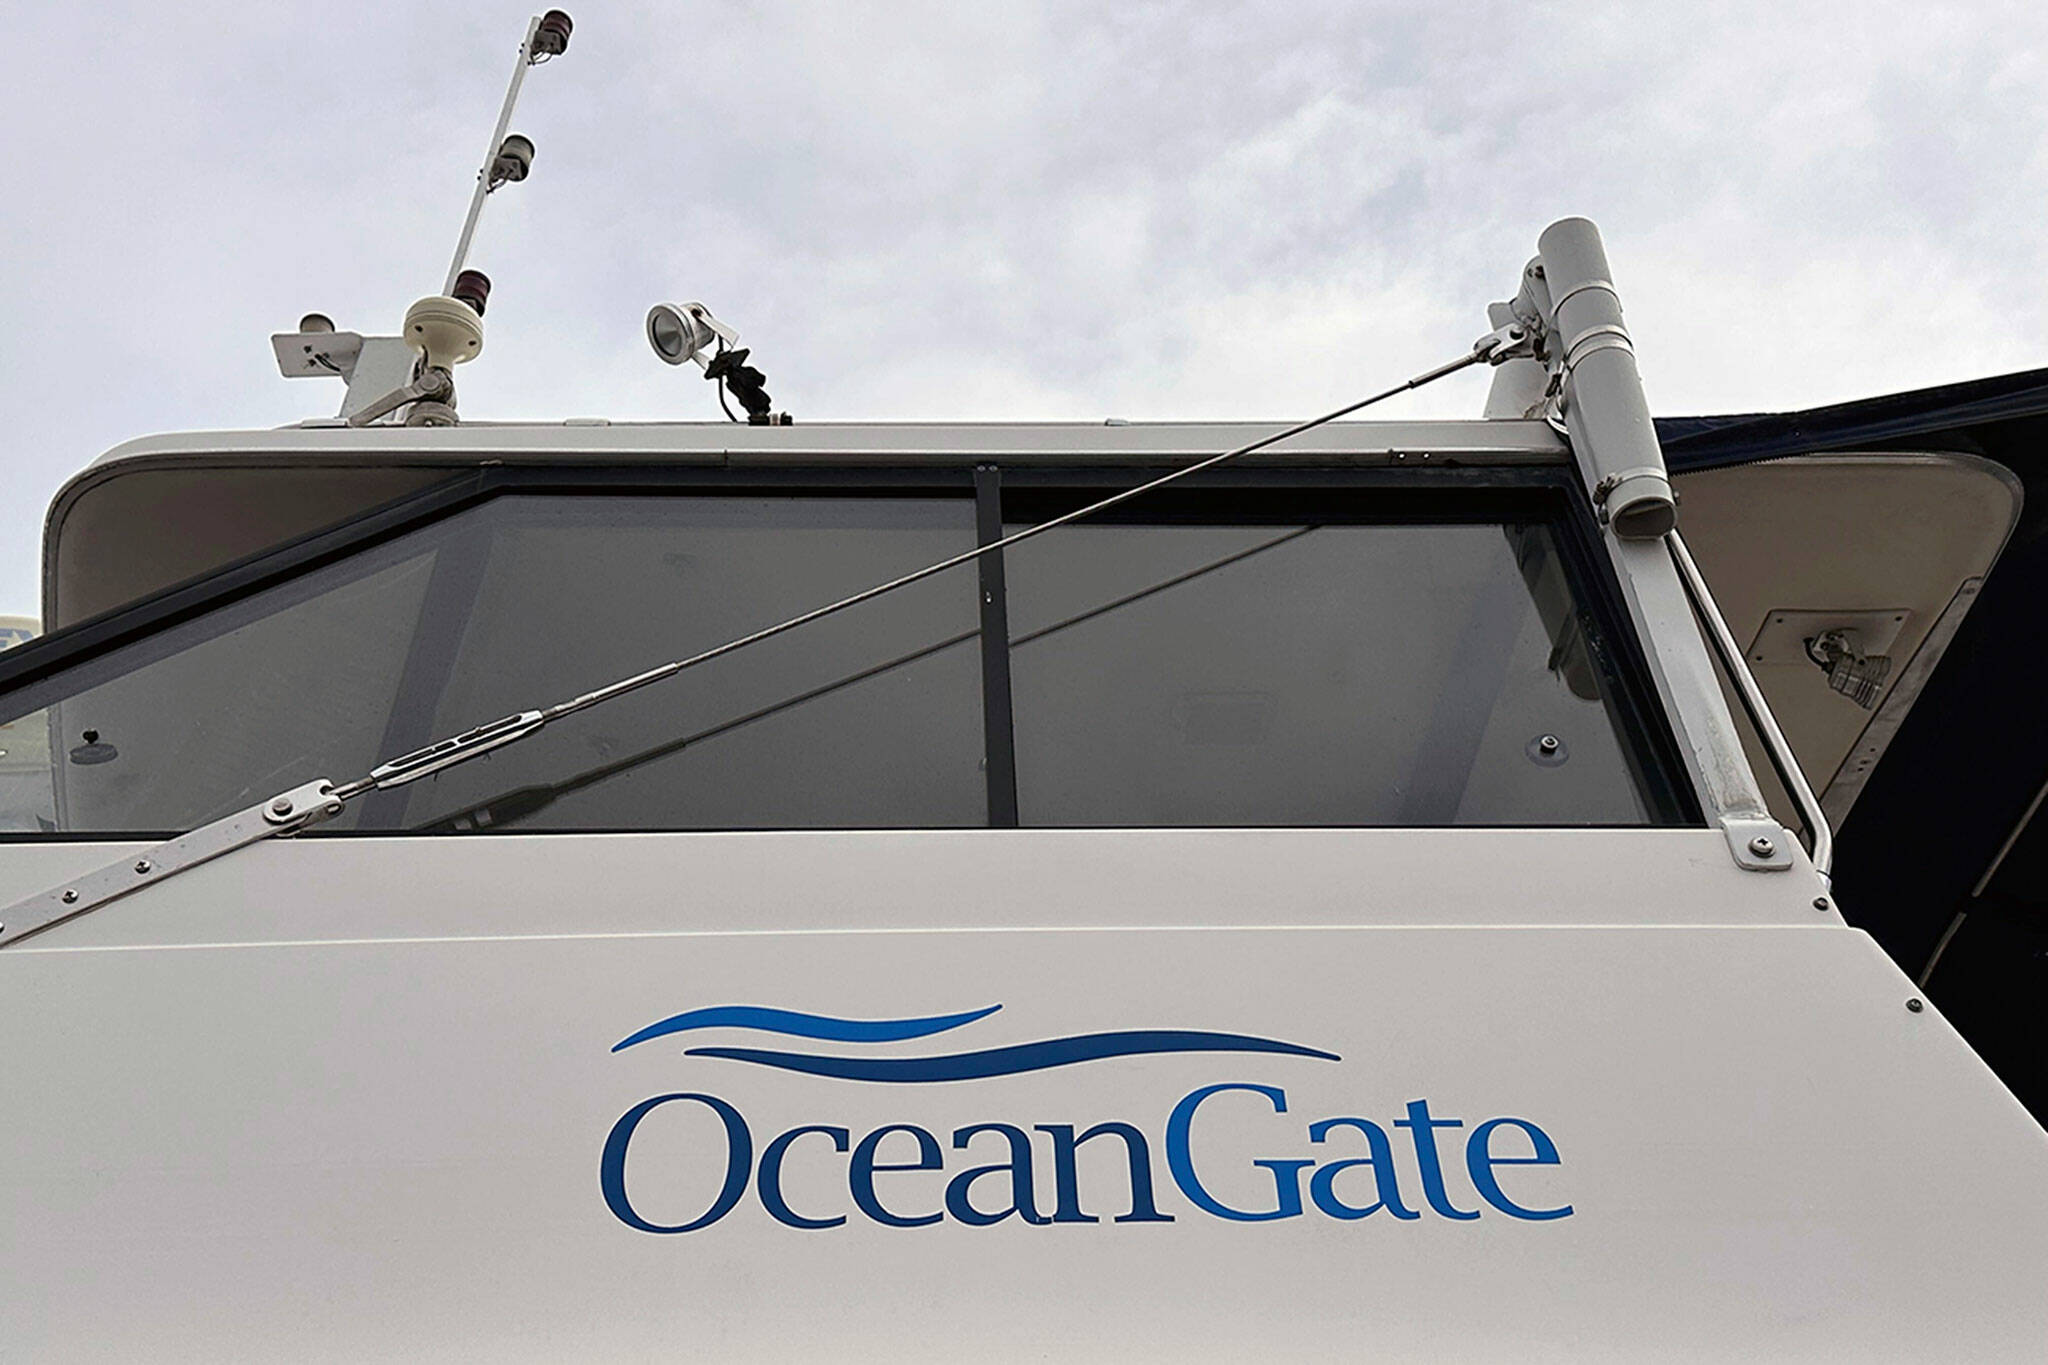 The logo for OceanGate Expeditions is seen on a boat parked near the offices of the company at a marine industrial warehouse office door in Everett, Washington, Tuesday, June 20, 2023. Rescuers raced against time to find the missing submersible carrying five people, who were reported overdue Sunday night. (AP Photo/Ed Komenda)